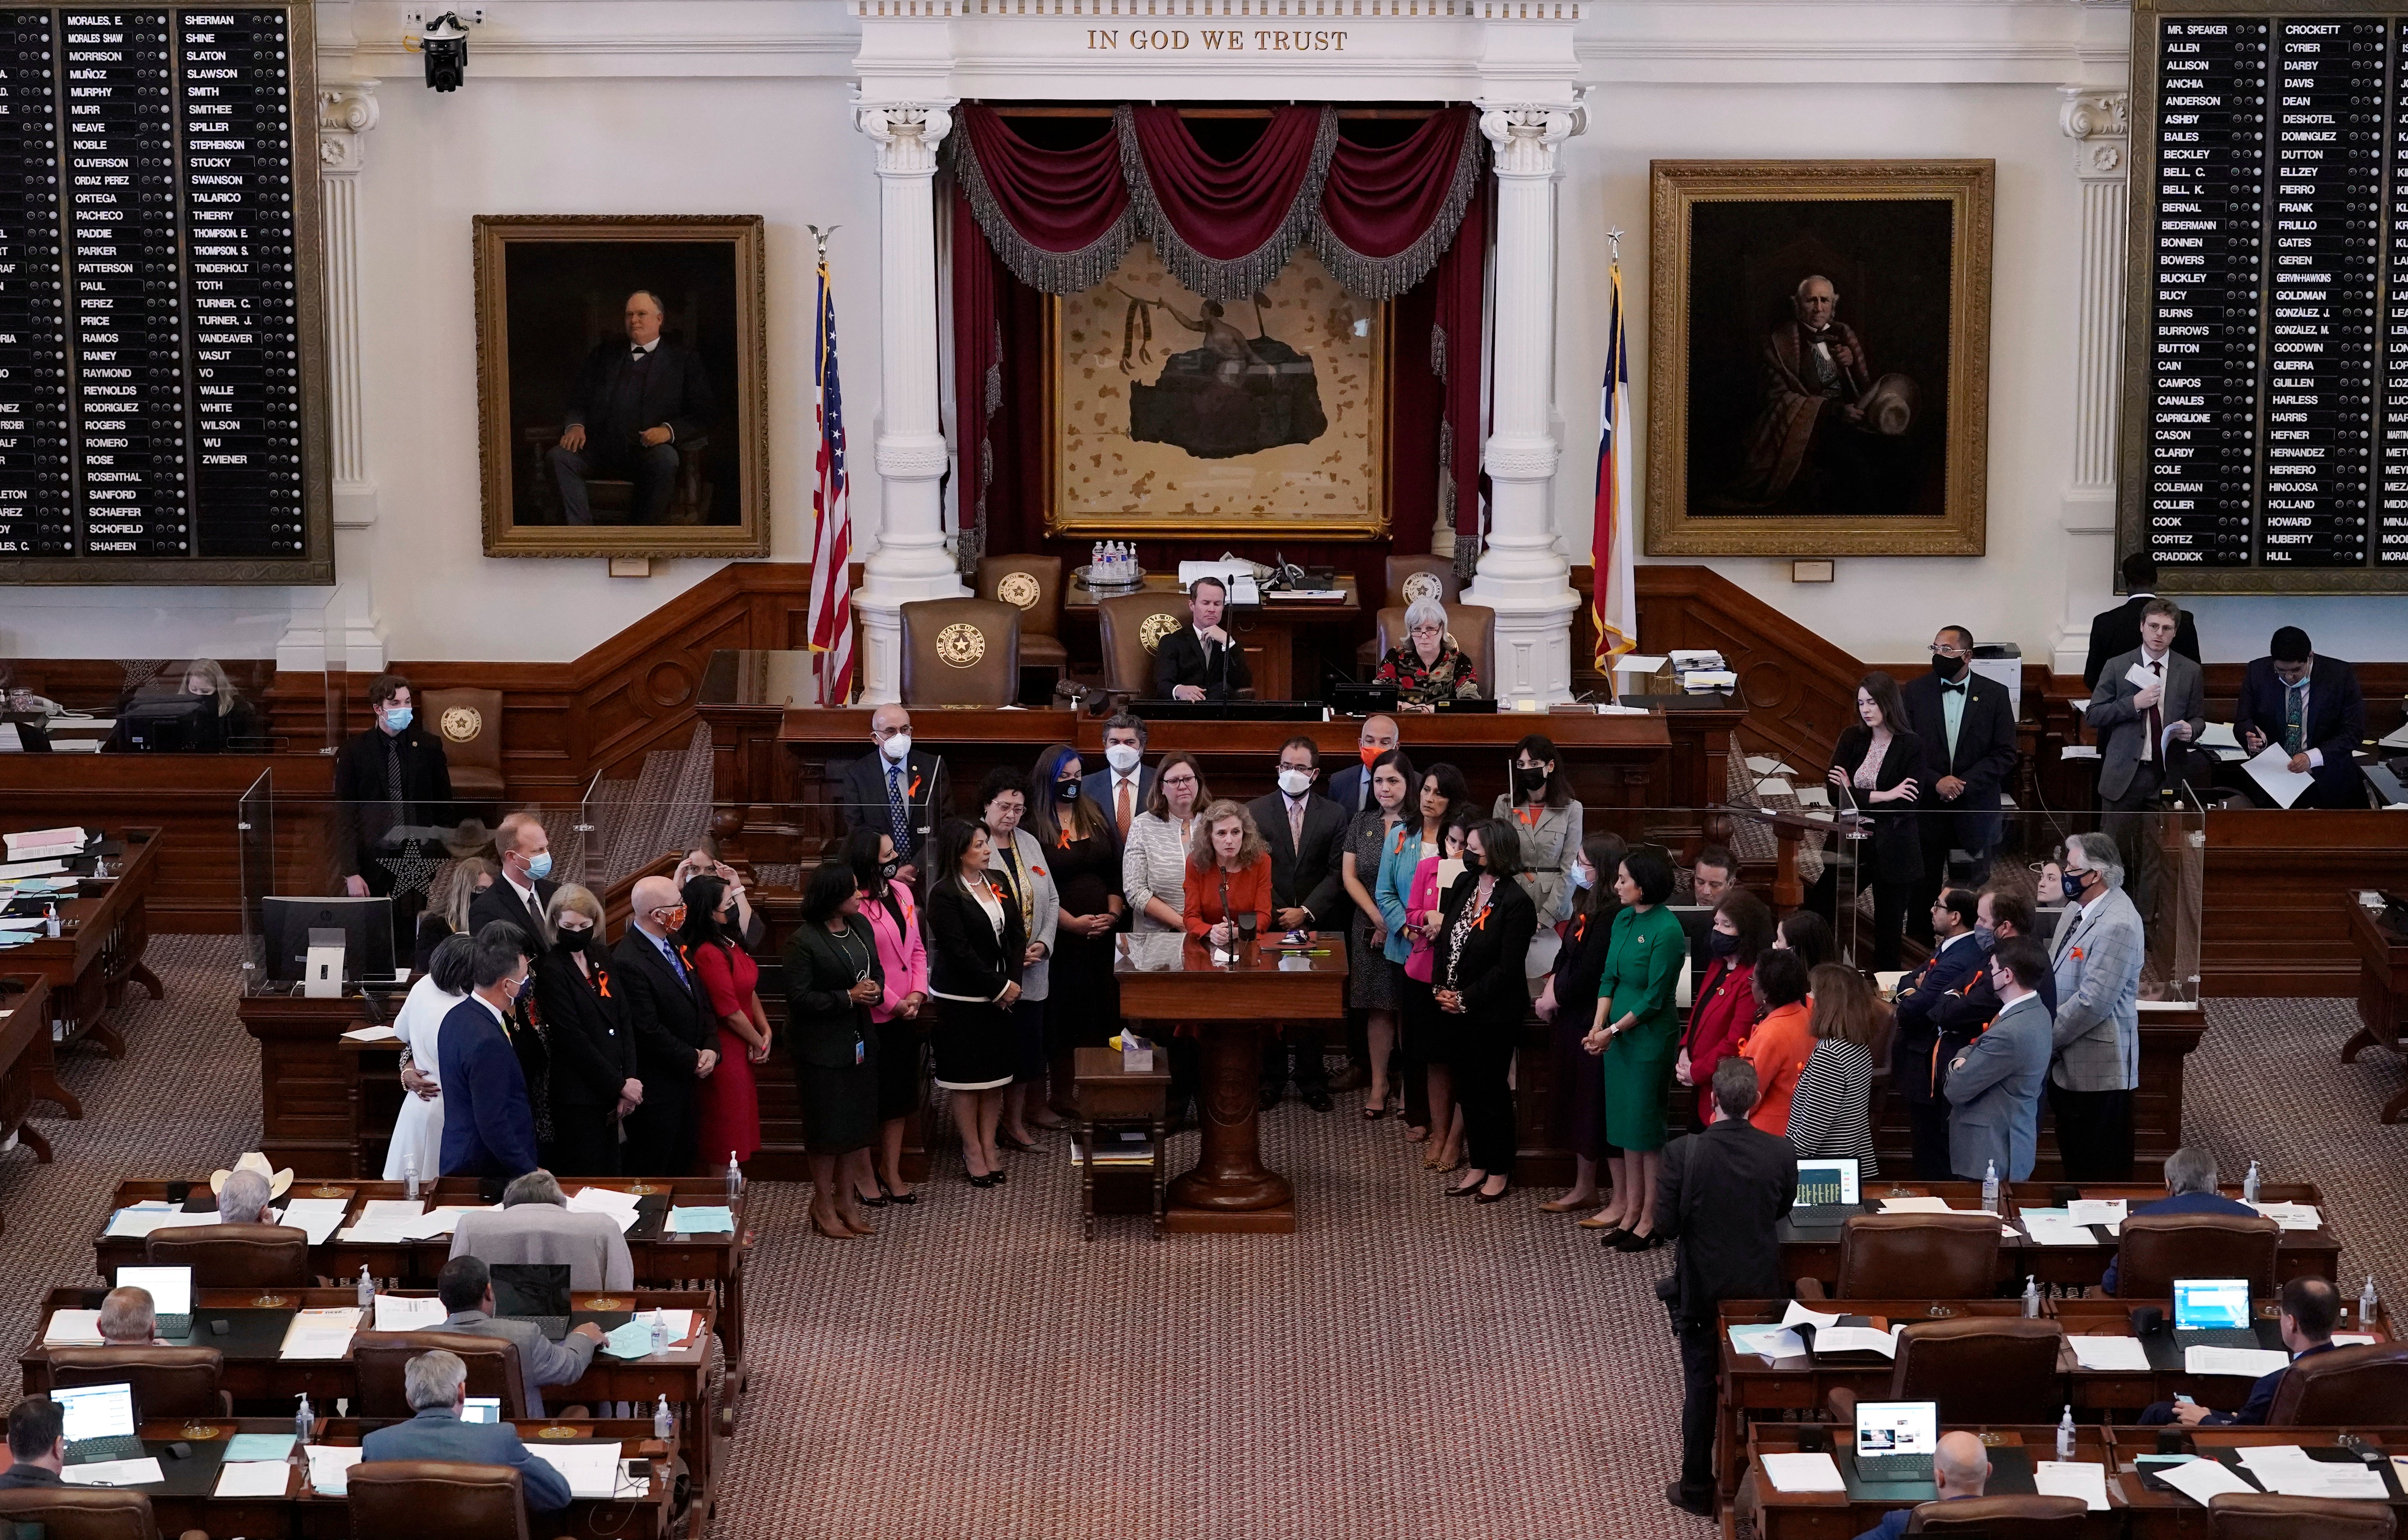 In this May 5, 2021, file photo, Texas state Rep. Donna Howard, D-Austin, center at lectern, stands with fellow lawmakers in the House Chamber in Austin, Texas, as she opposes a bill introduced that would ban abortions as early as six weeks and allow private citizens to enforce it through civil lawsuits, under a measure given preliminary approval by the Republican-dominated House